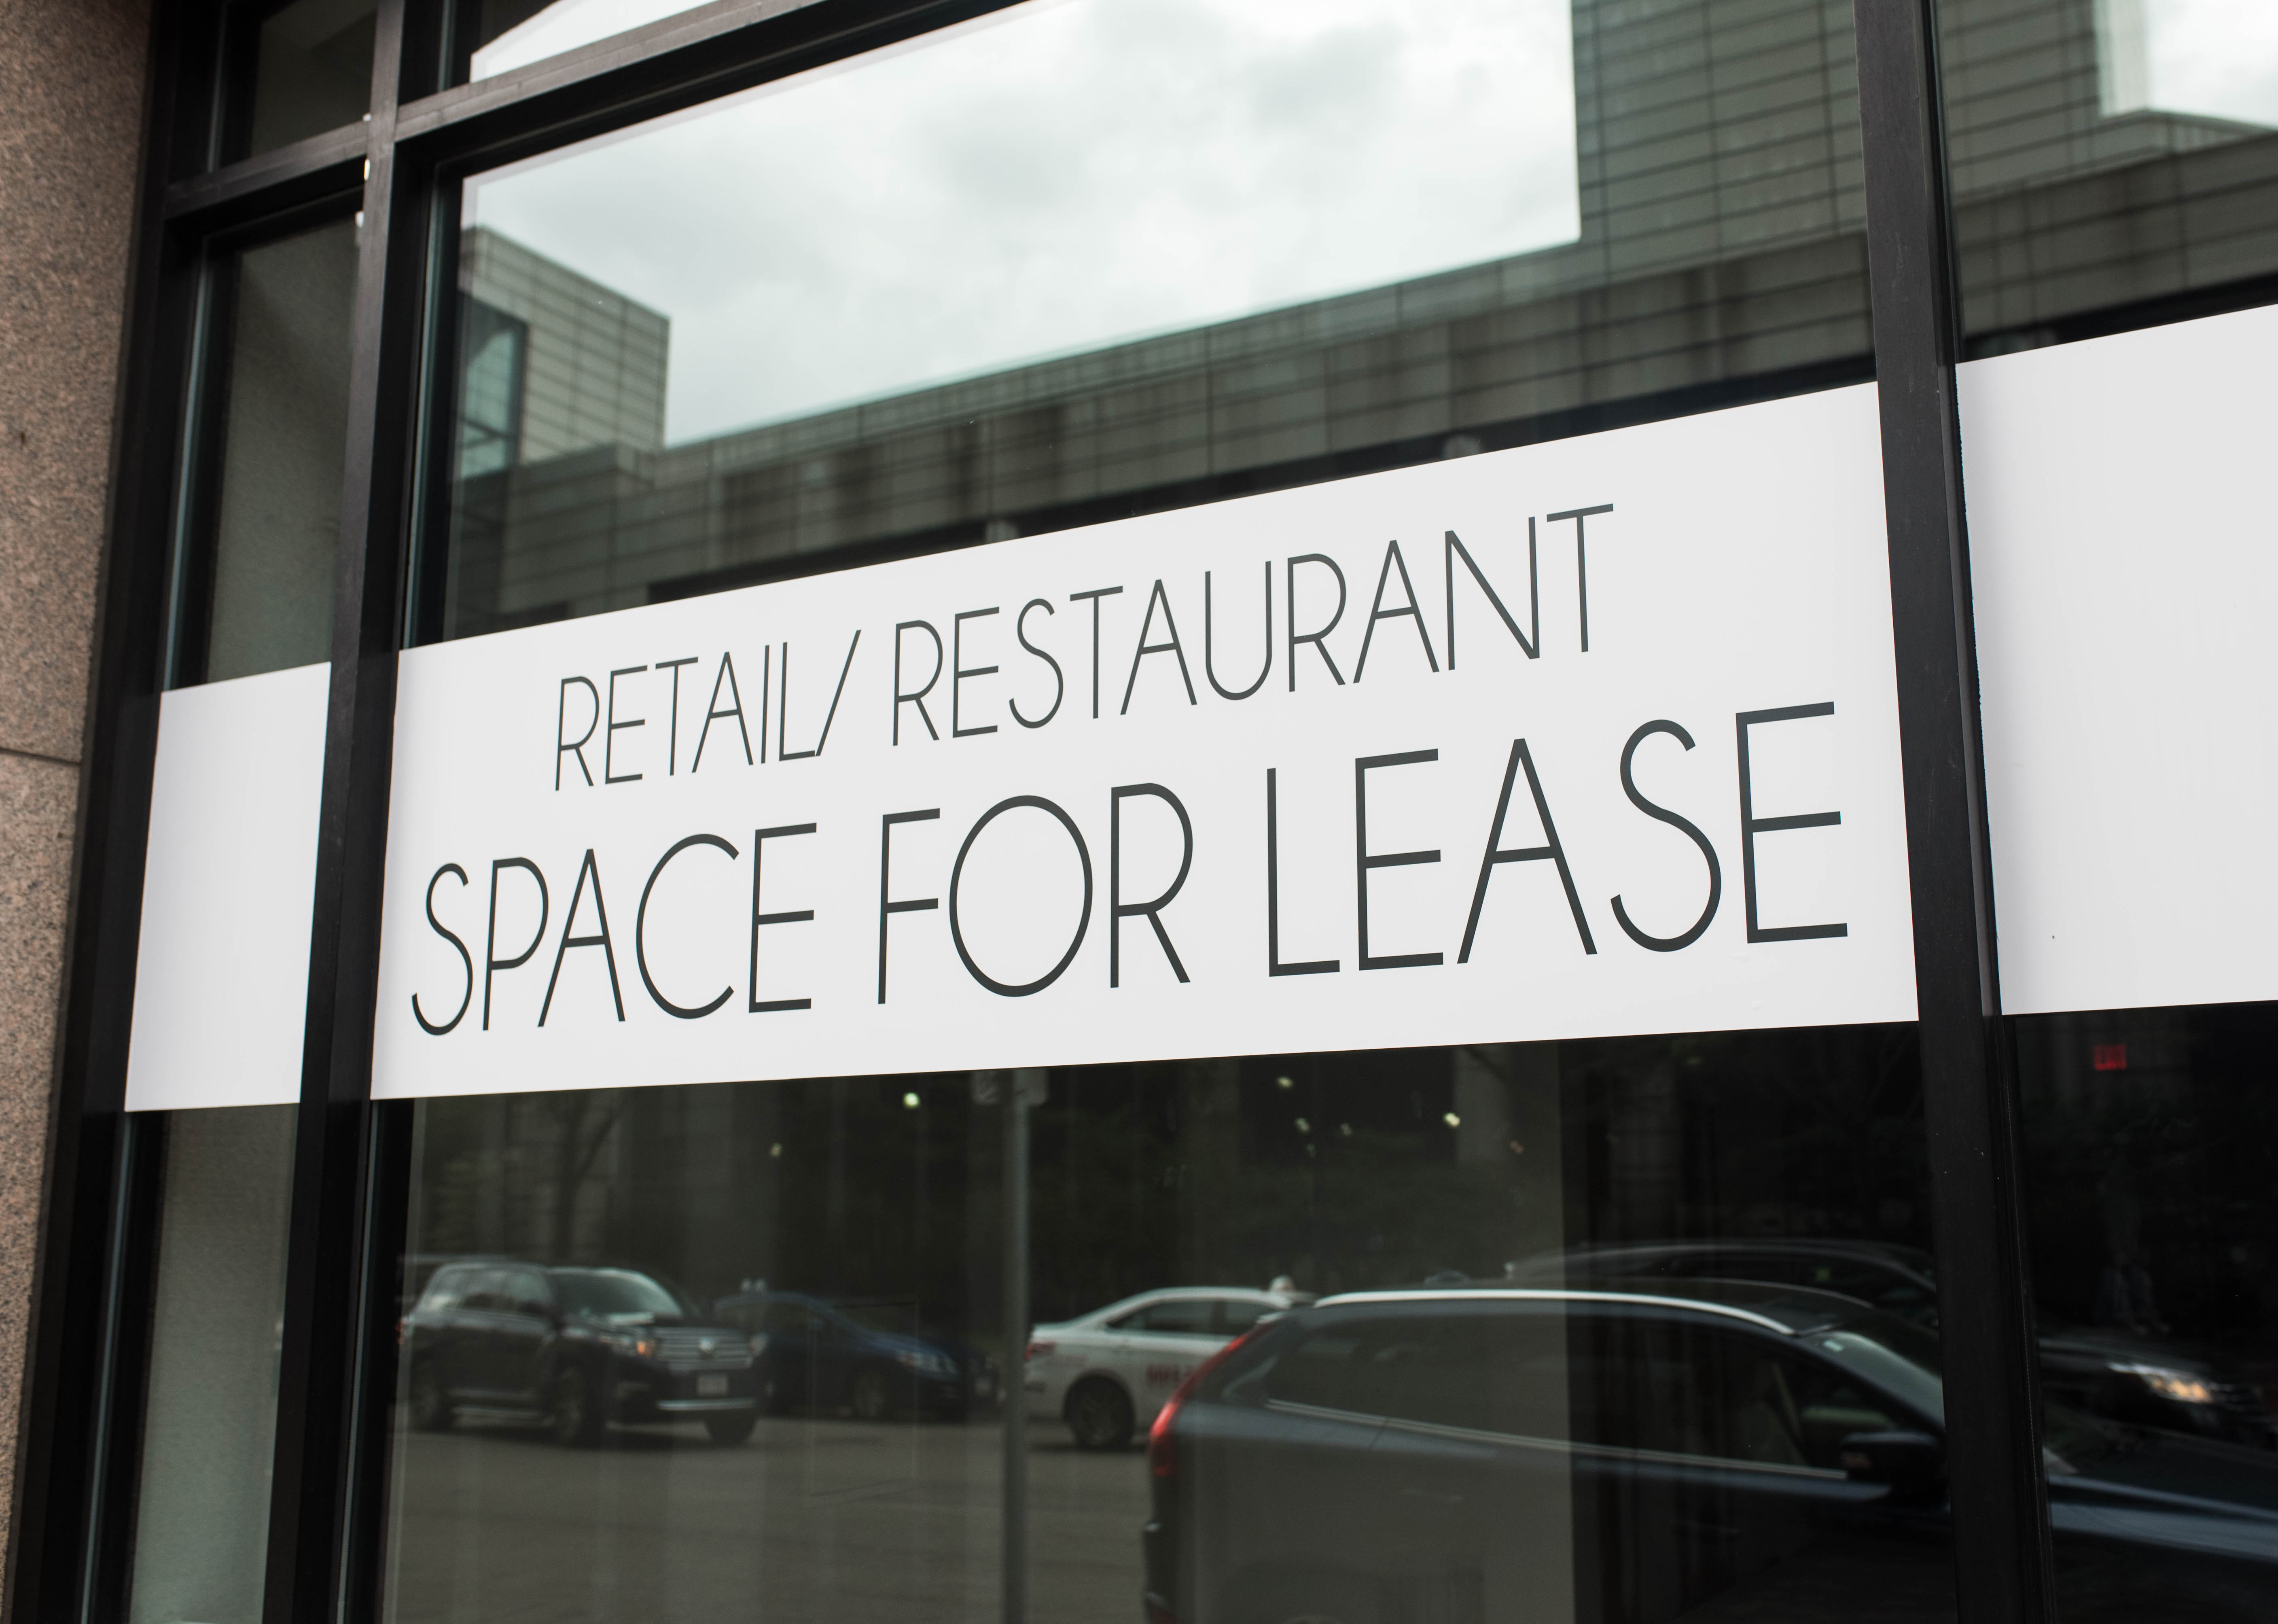 Reail restaurant space for lease